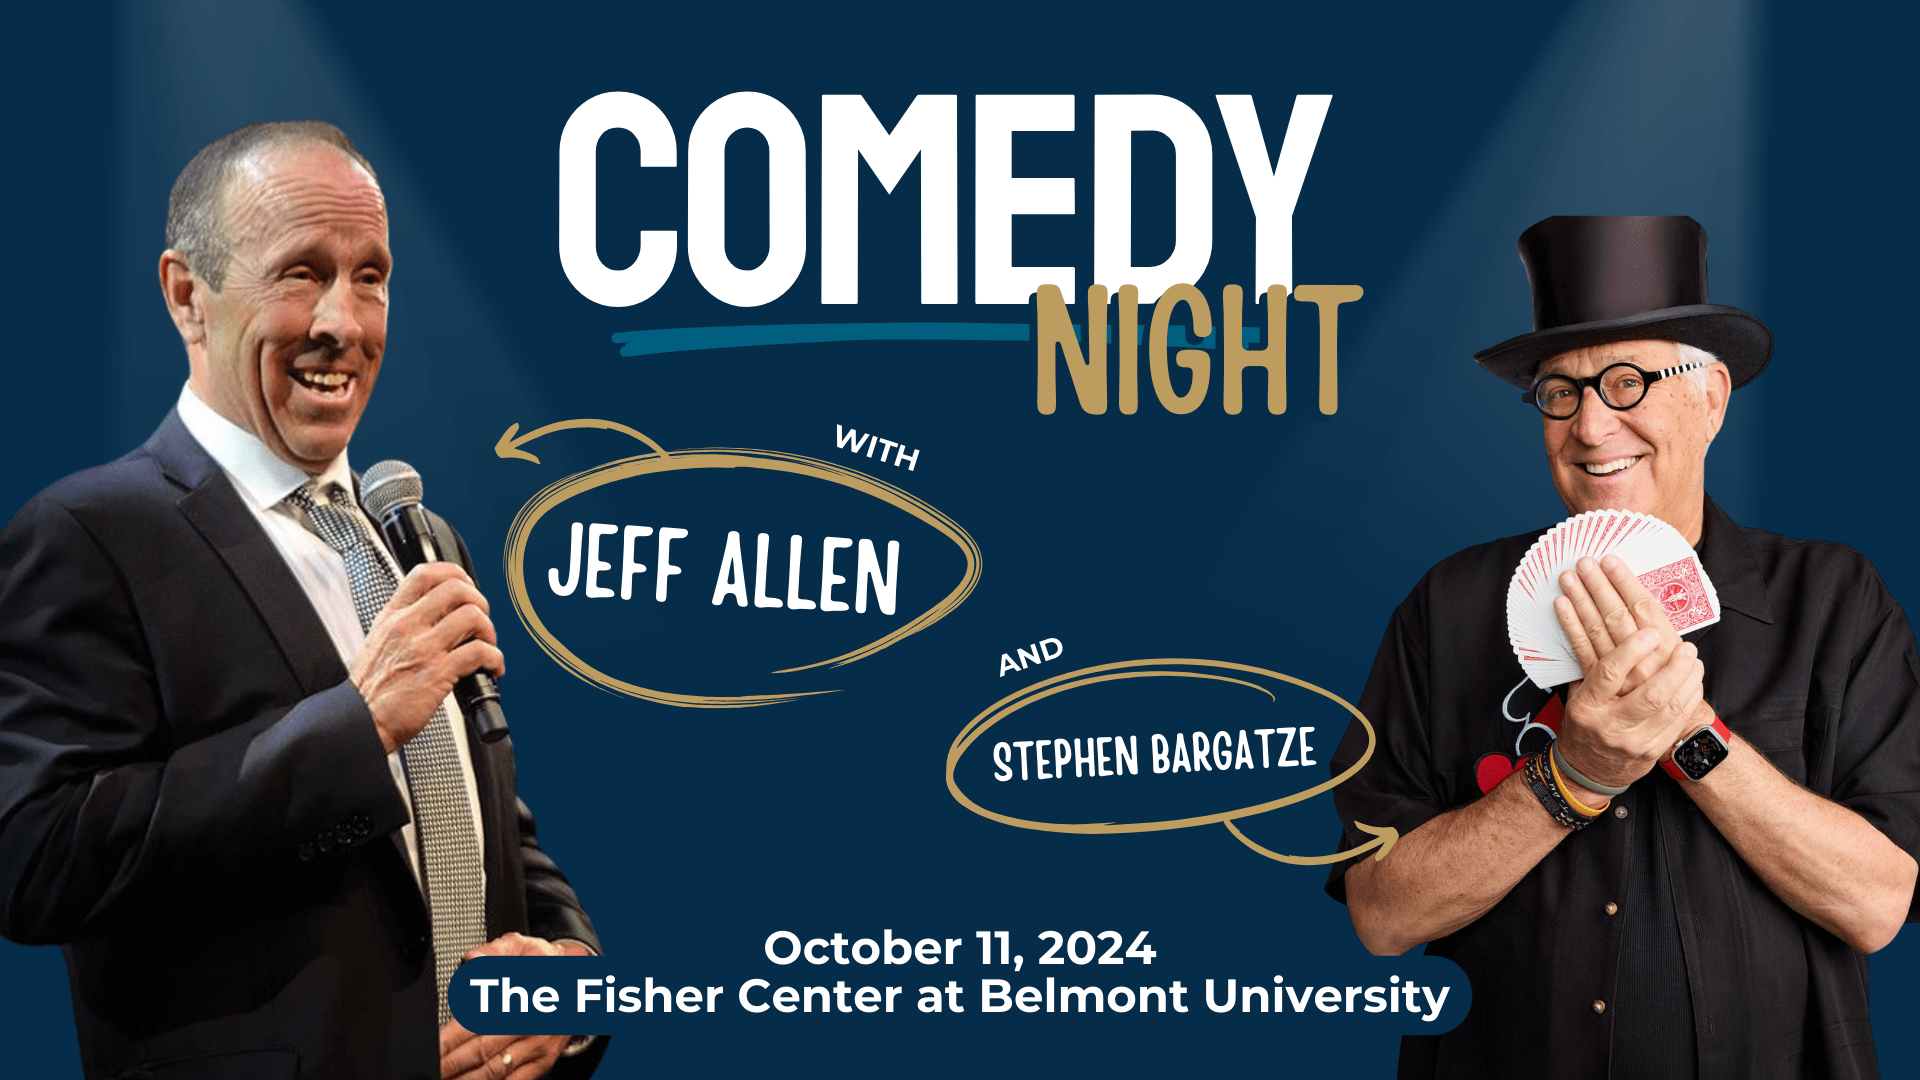 Comedy Night with Jeff Allen and Stephen Bargatze